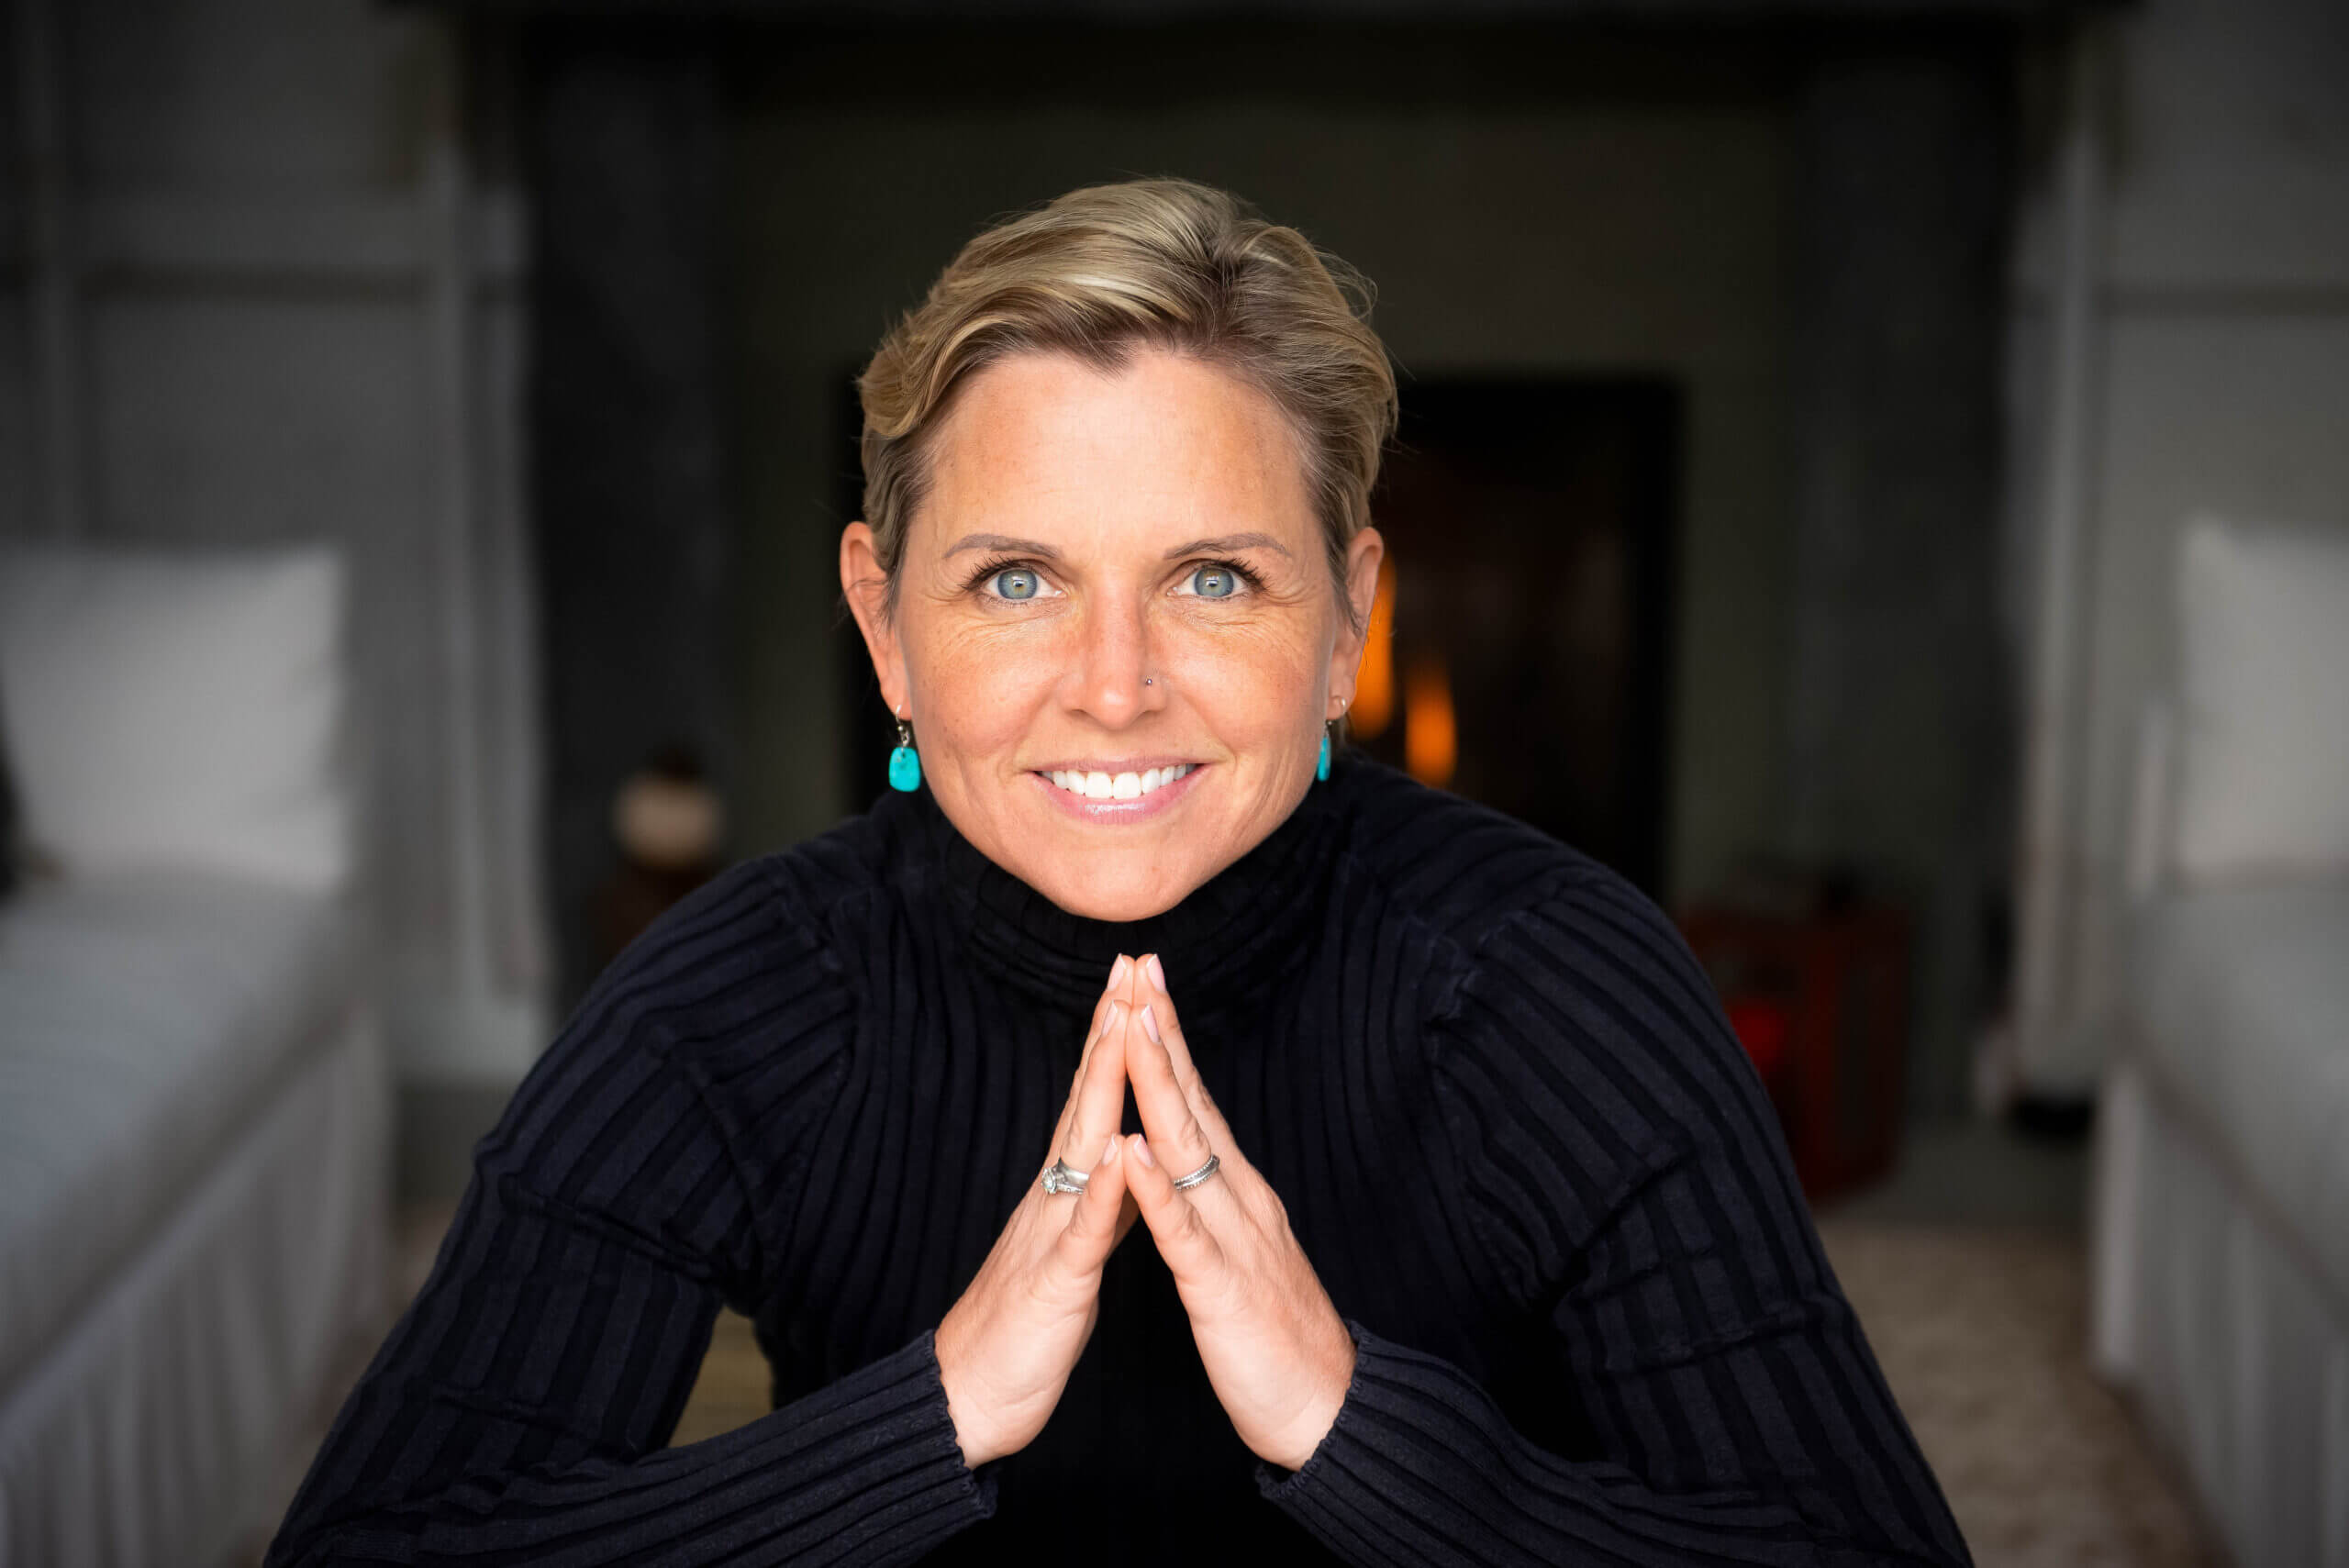 Color image of a white woman with blond hair in a black turtleneck looking right into the camera smiling.